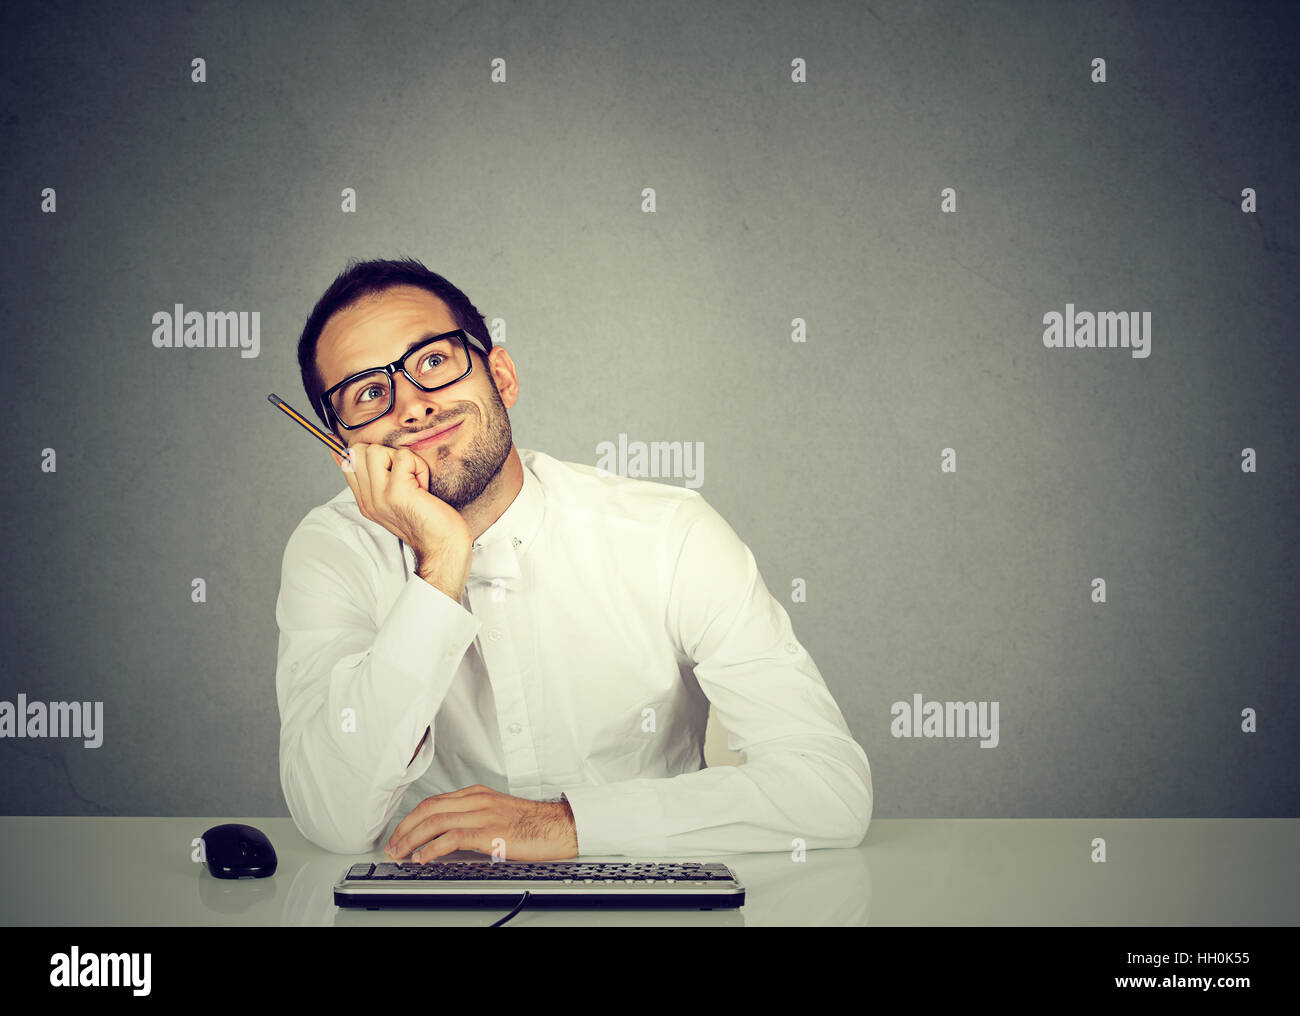 young funny business man thinking daydreaming Stock Photo